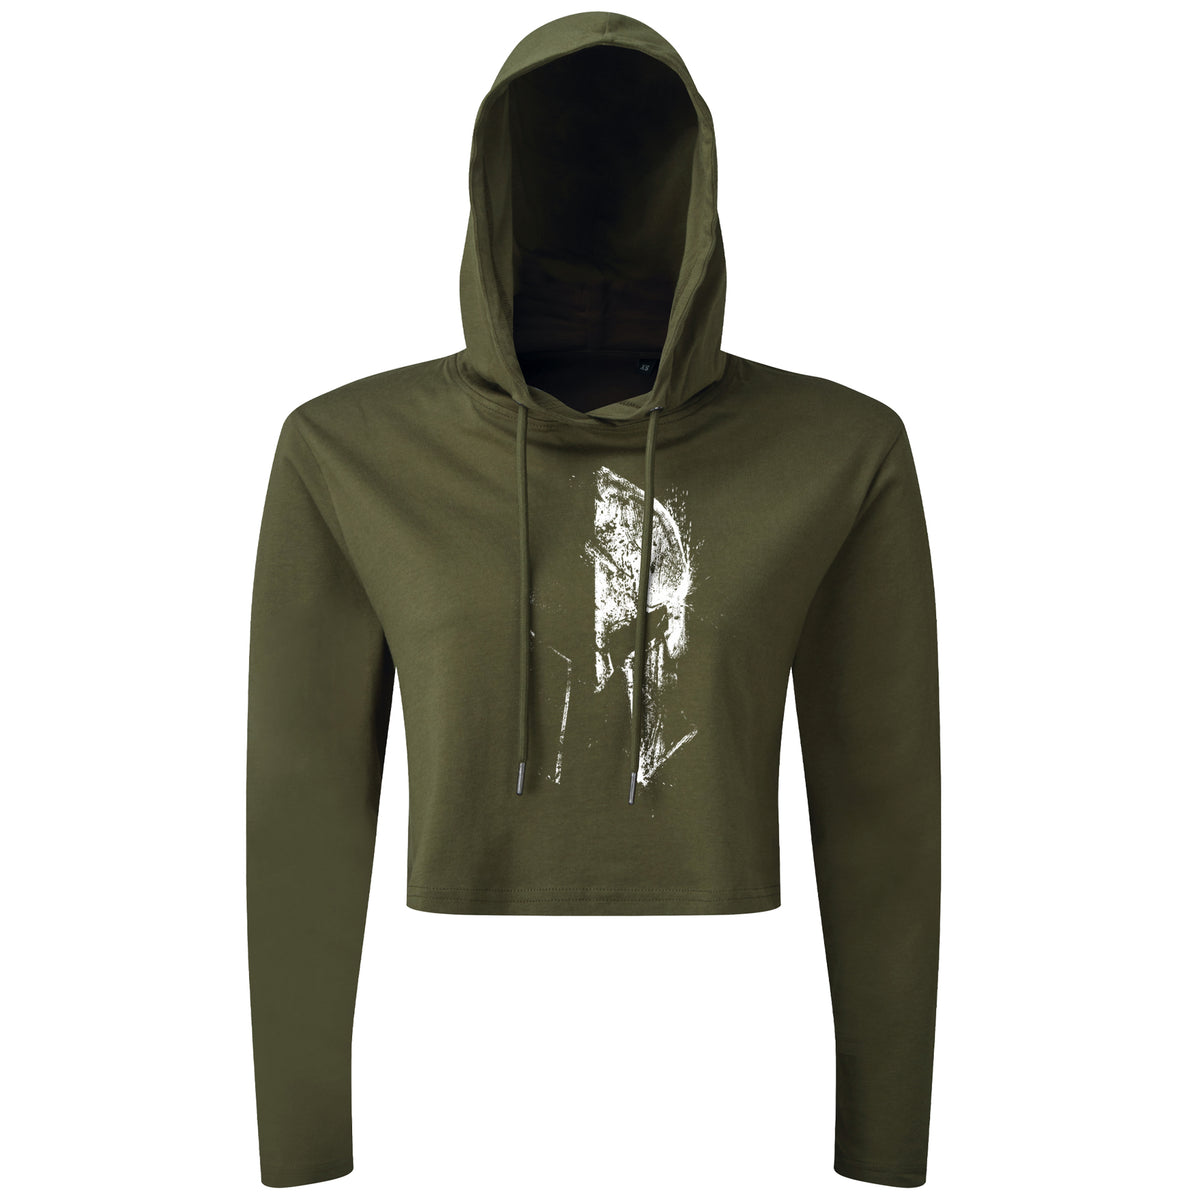 Spartan Faded - Cropped Hoodie